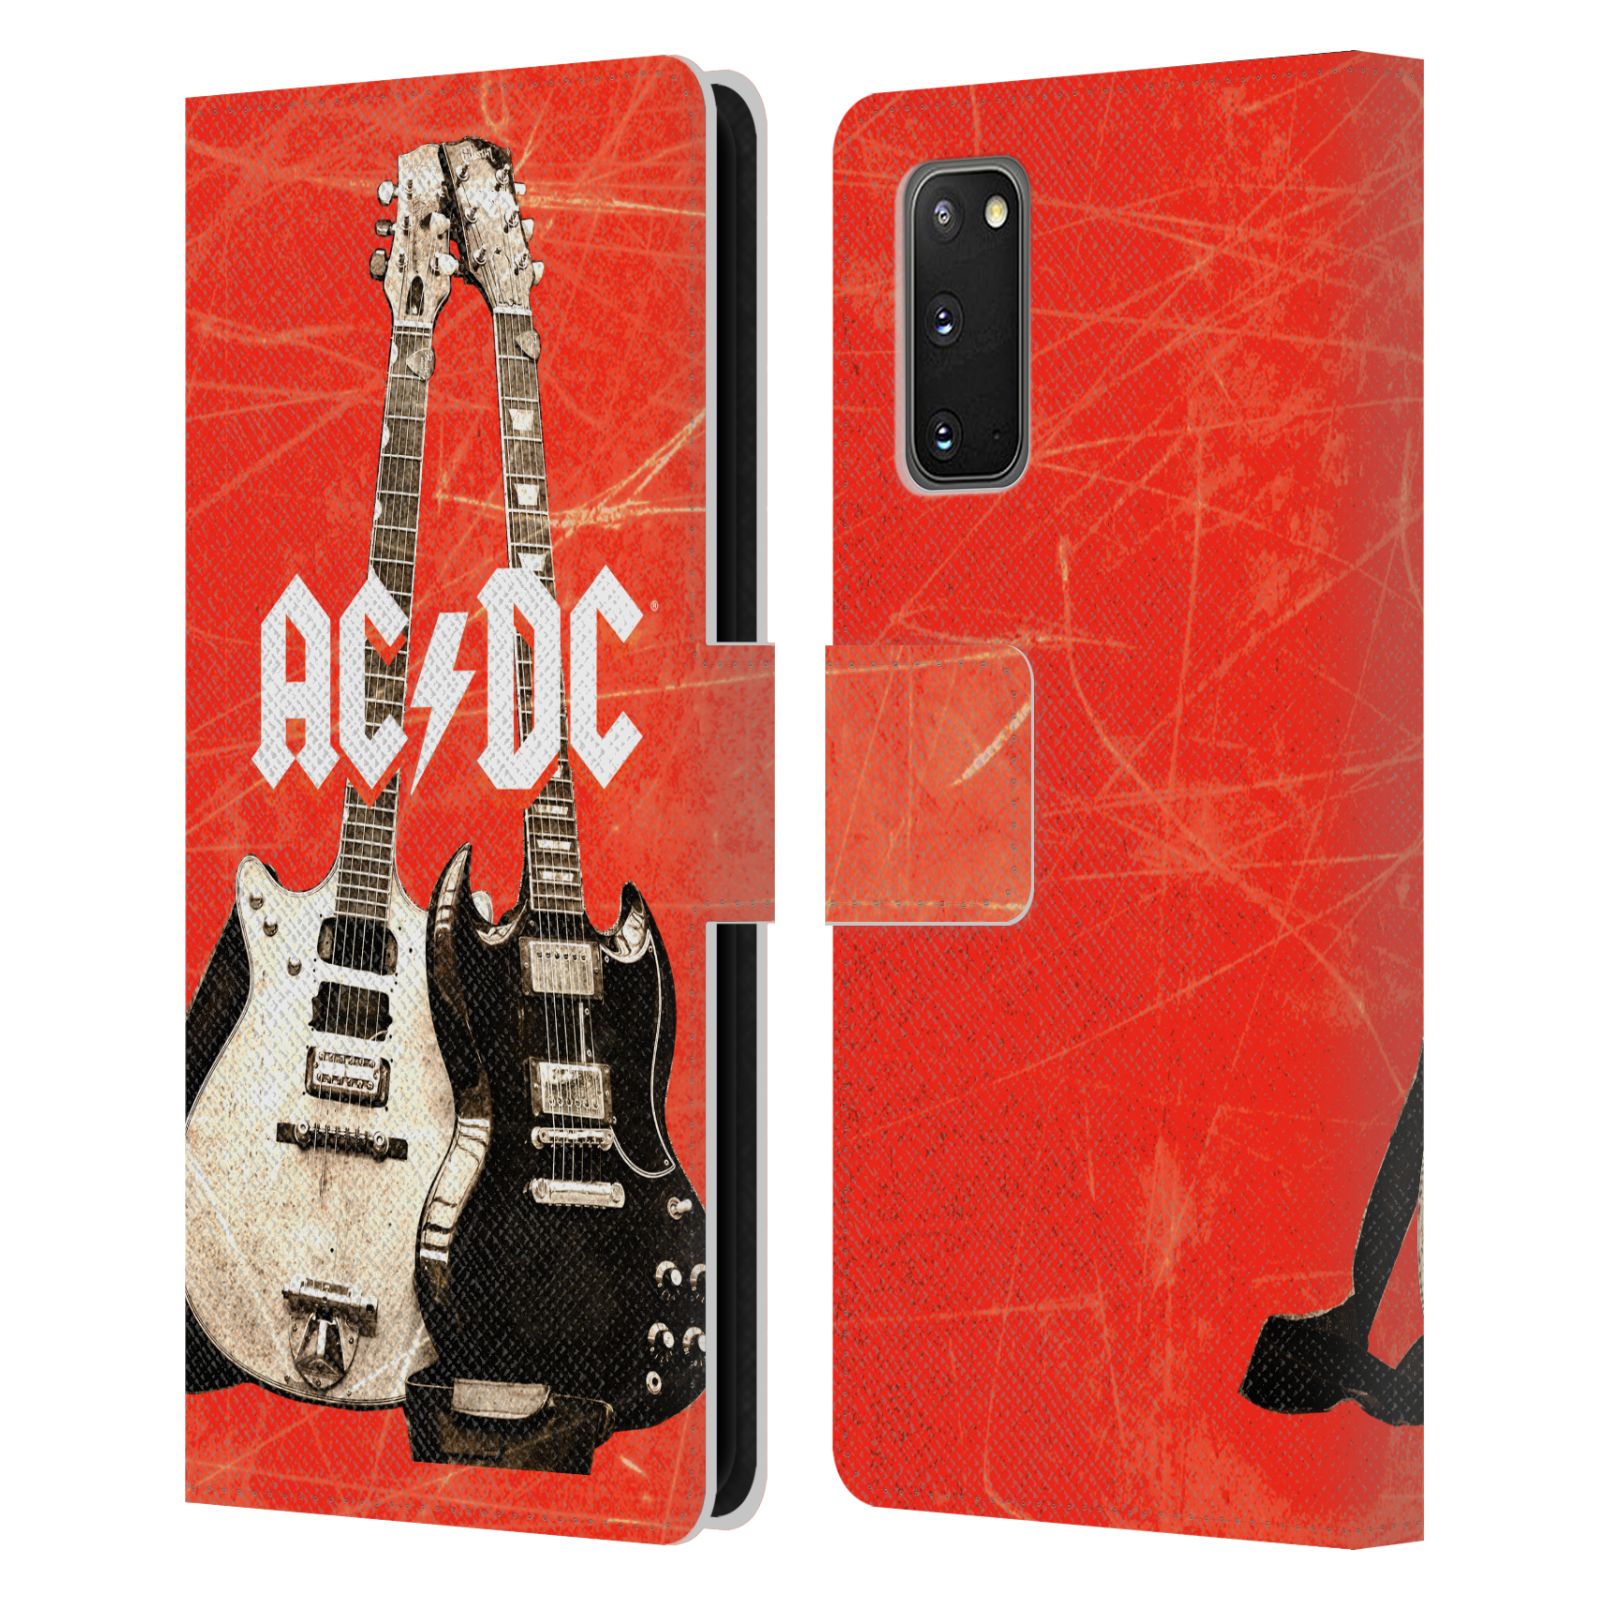 OFFICIAL AC/DC ACDC ICONIC LEATHER BOOK WALLET CASE COVER FOR SAMSUNG  PHONES 1